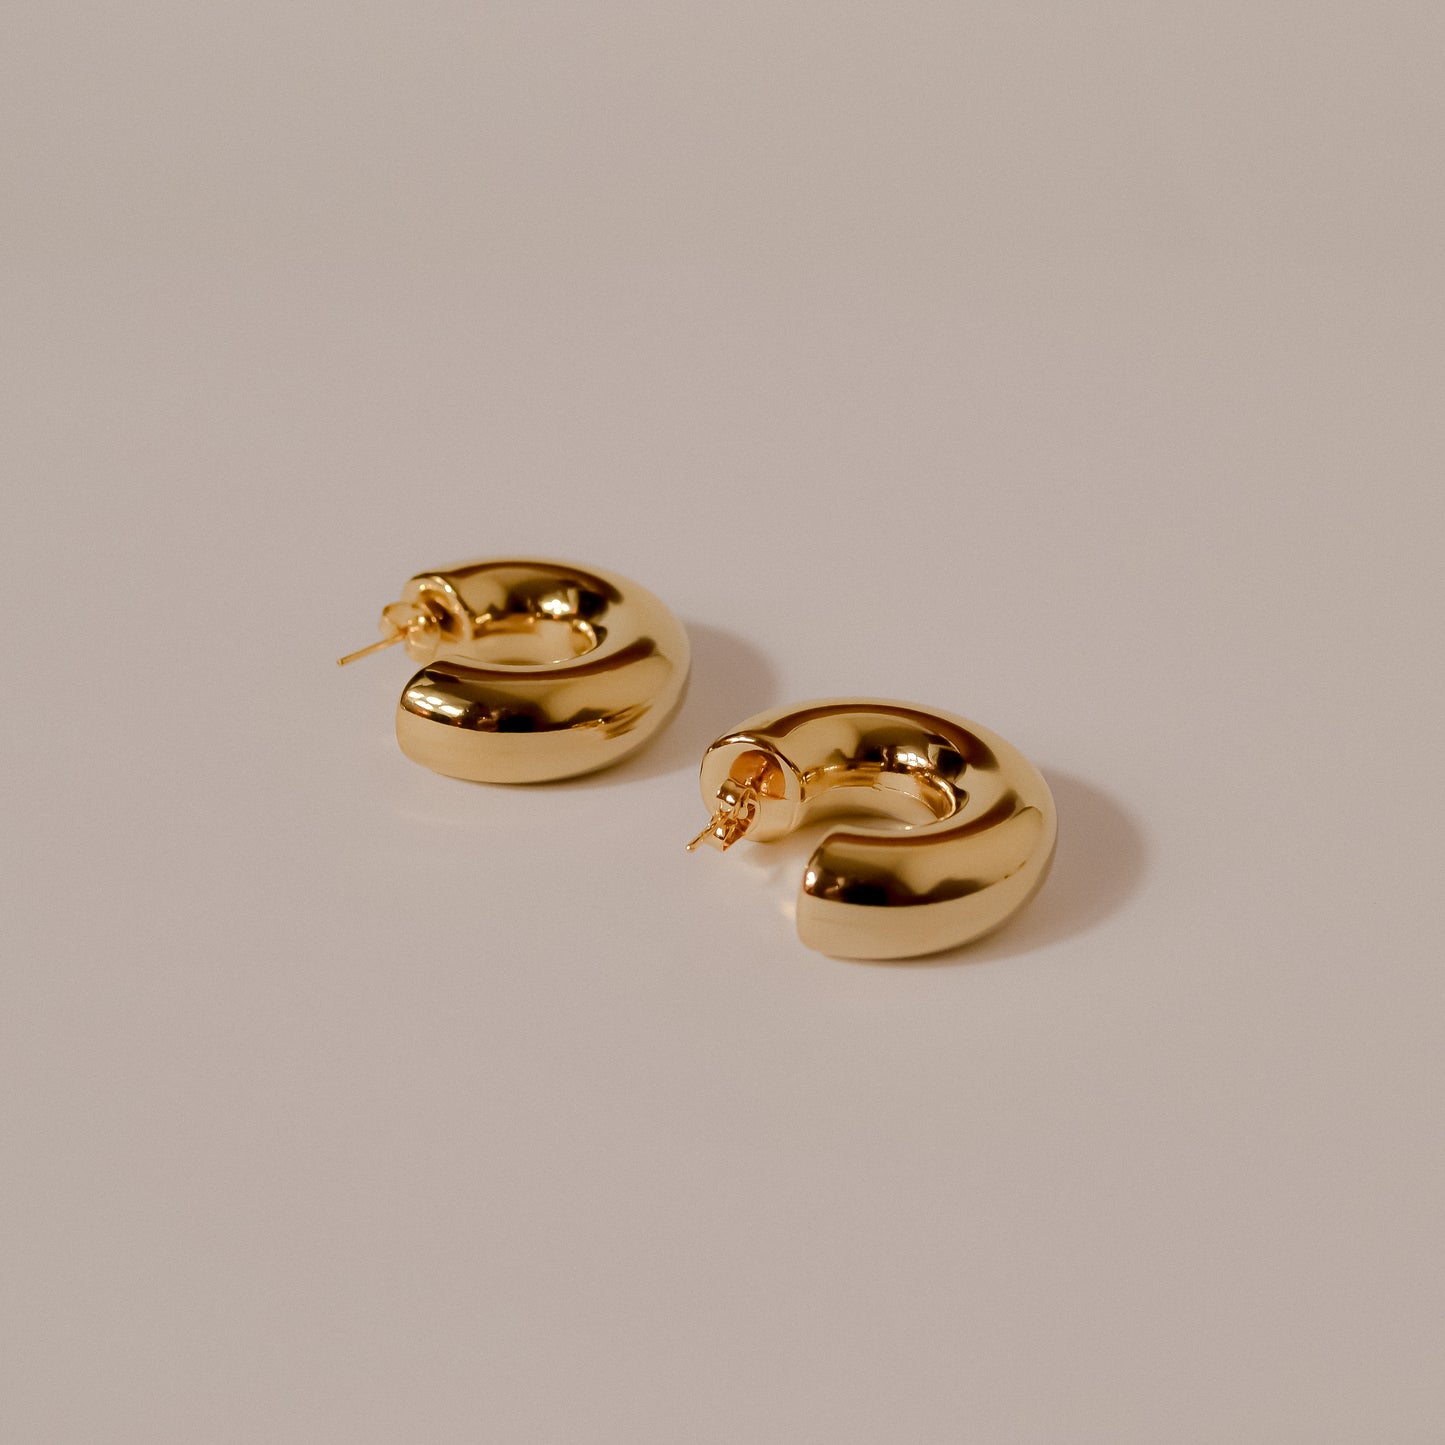 Sade chunky gold earrings, statement piece 